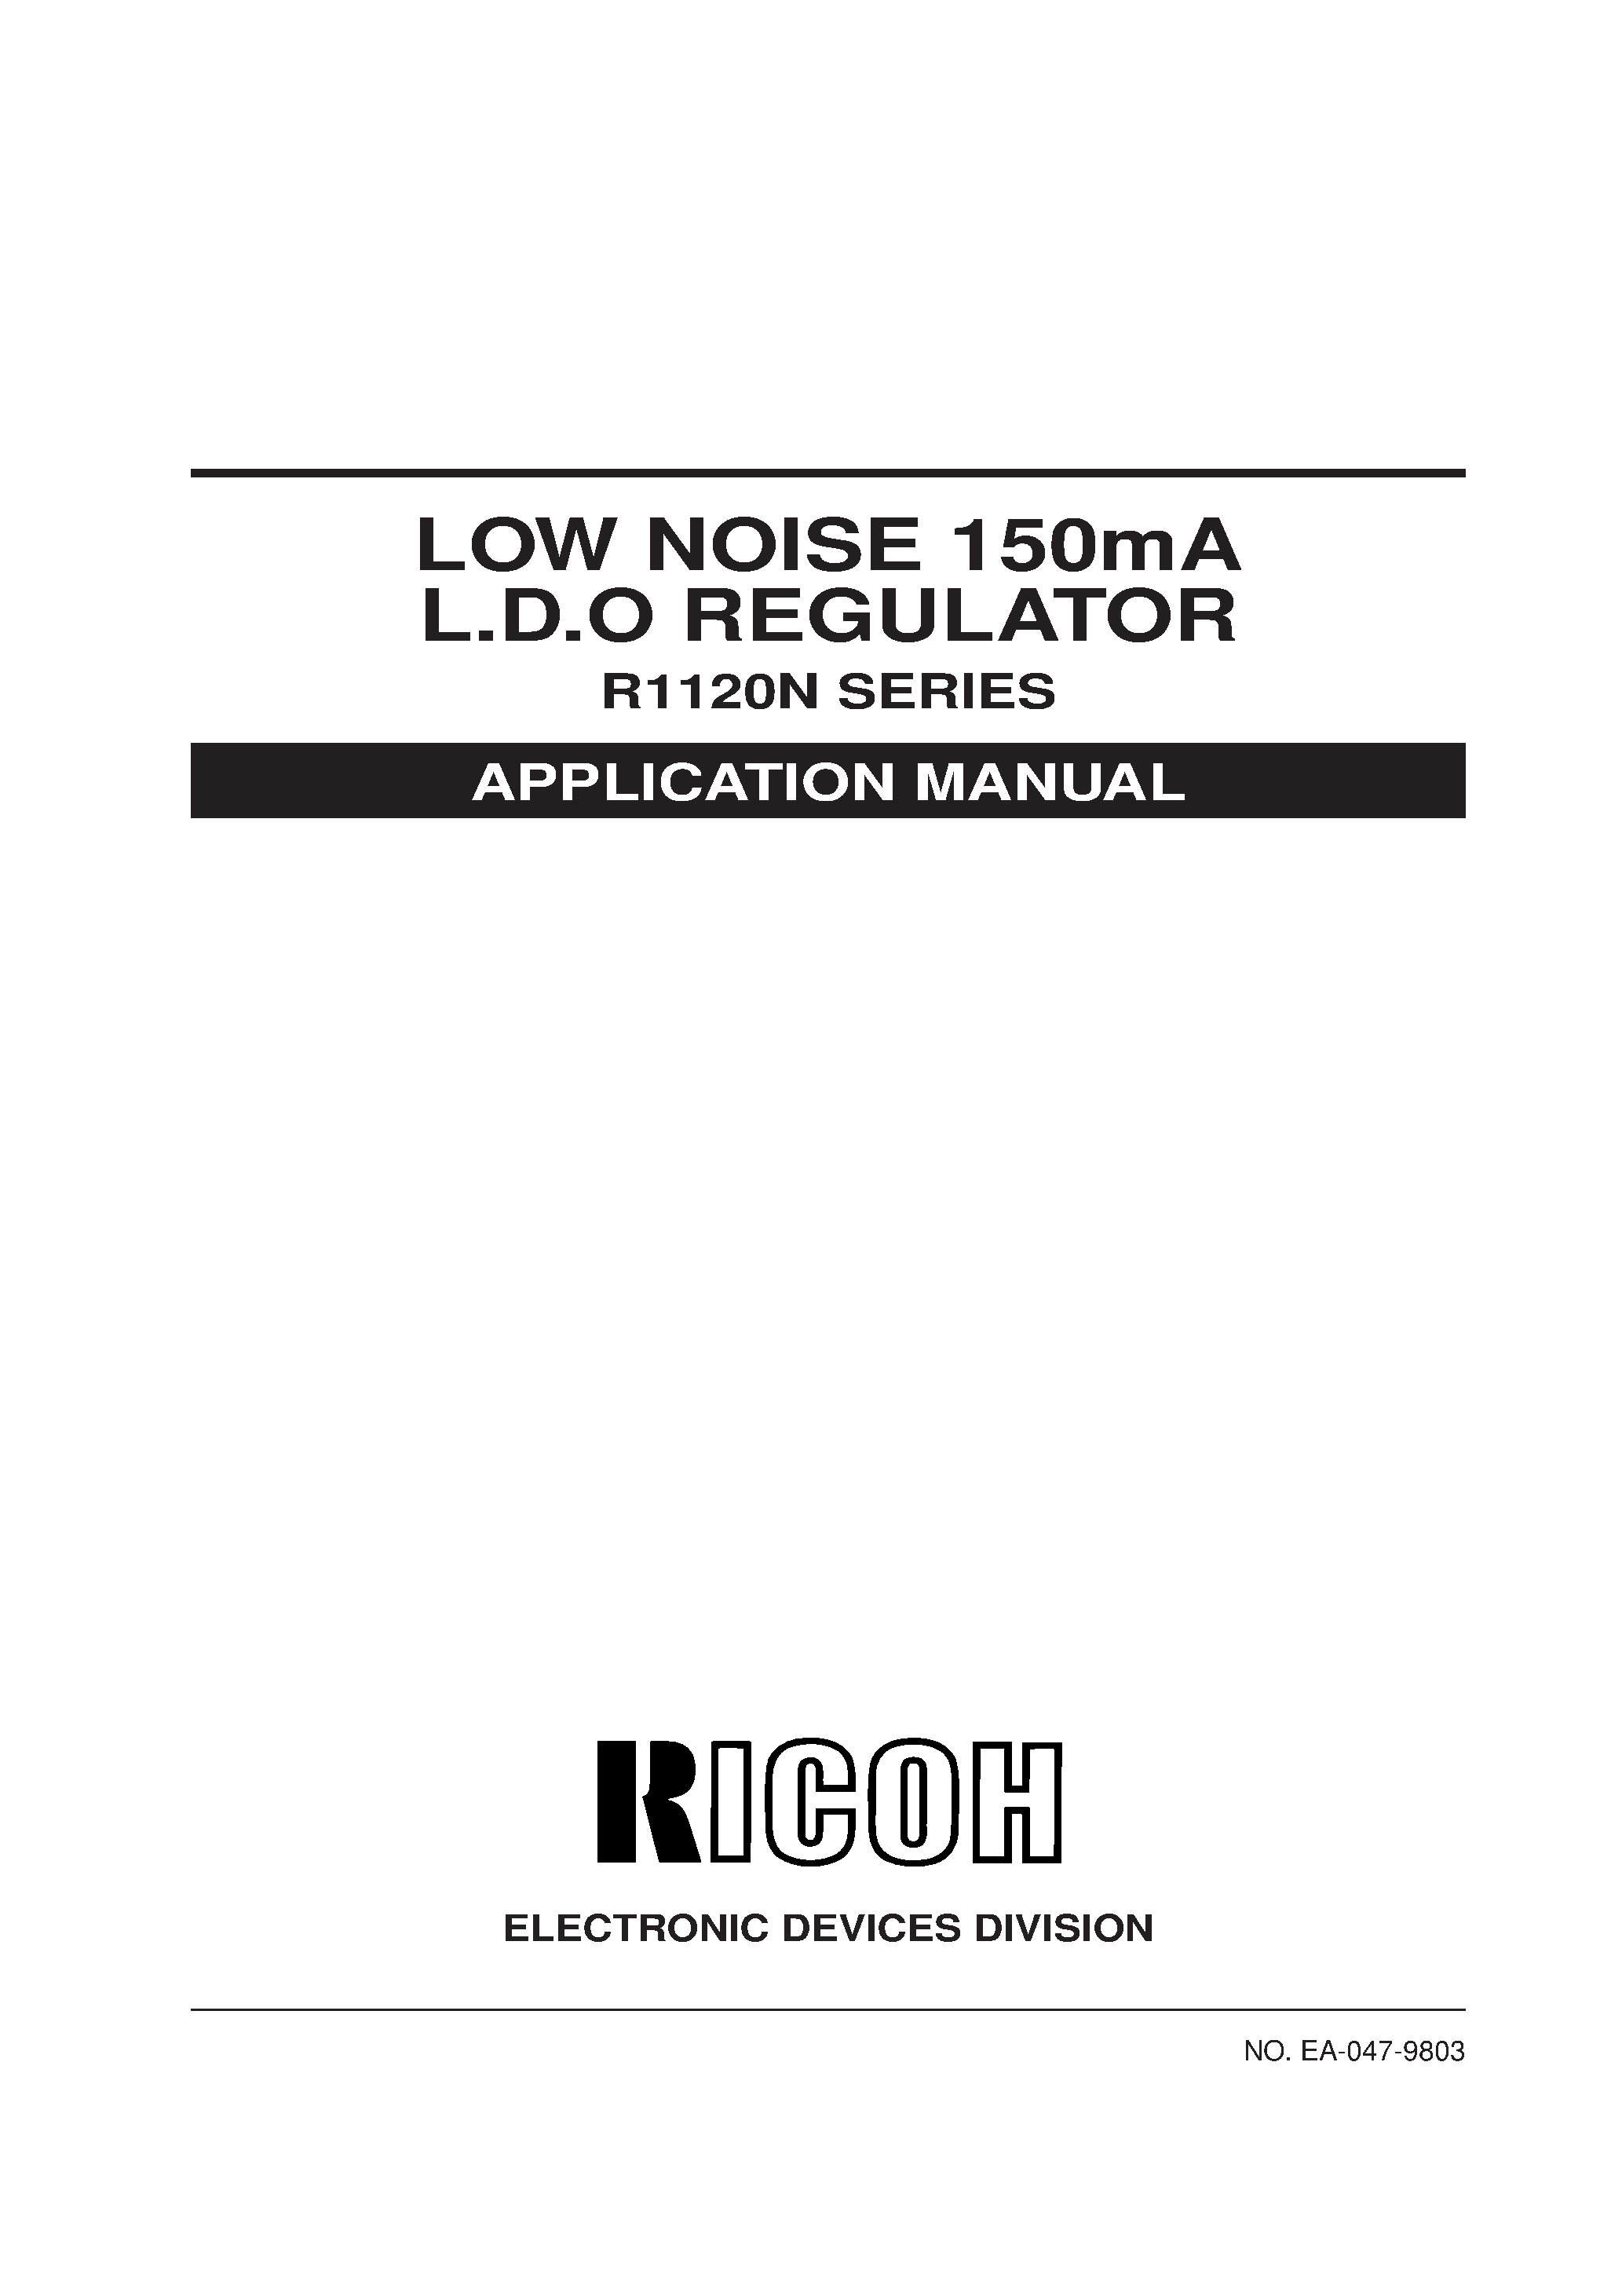 Datasheet R1120N501A - LOW NOISE 150mA L.D.O REGULATOR page 1